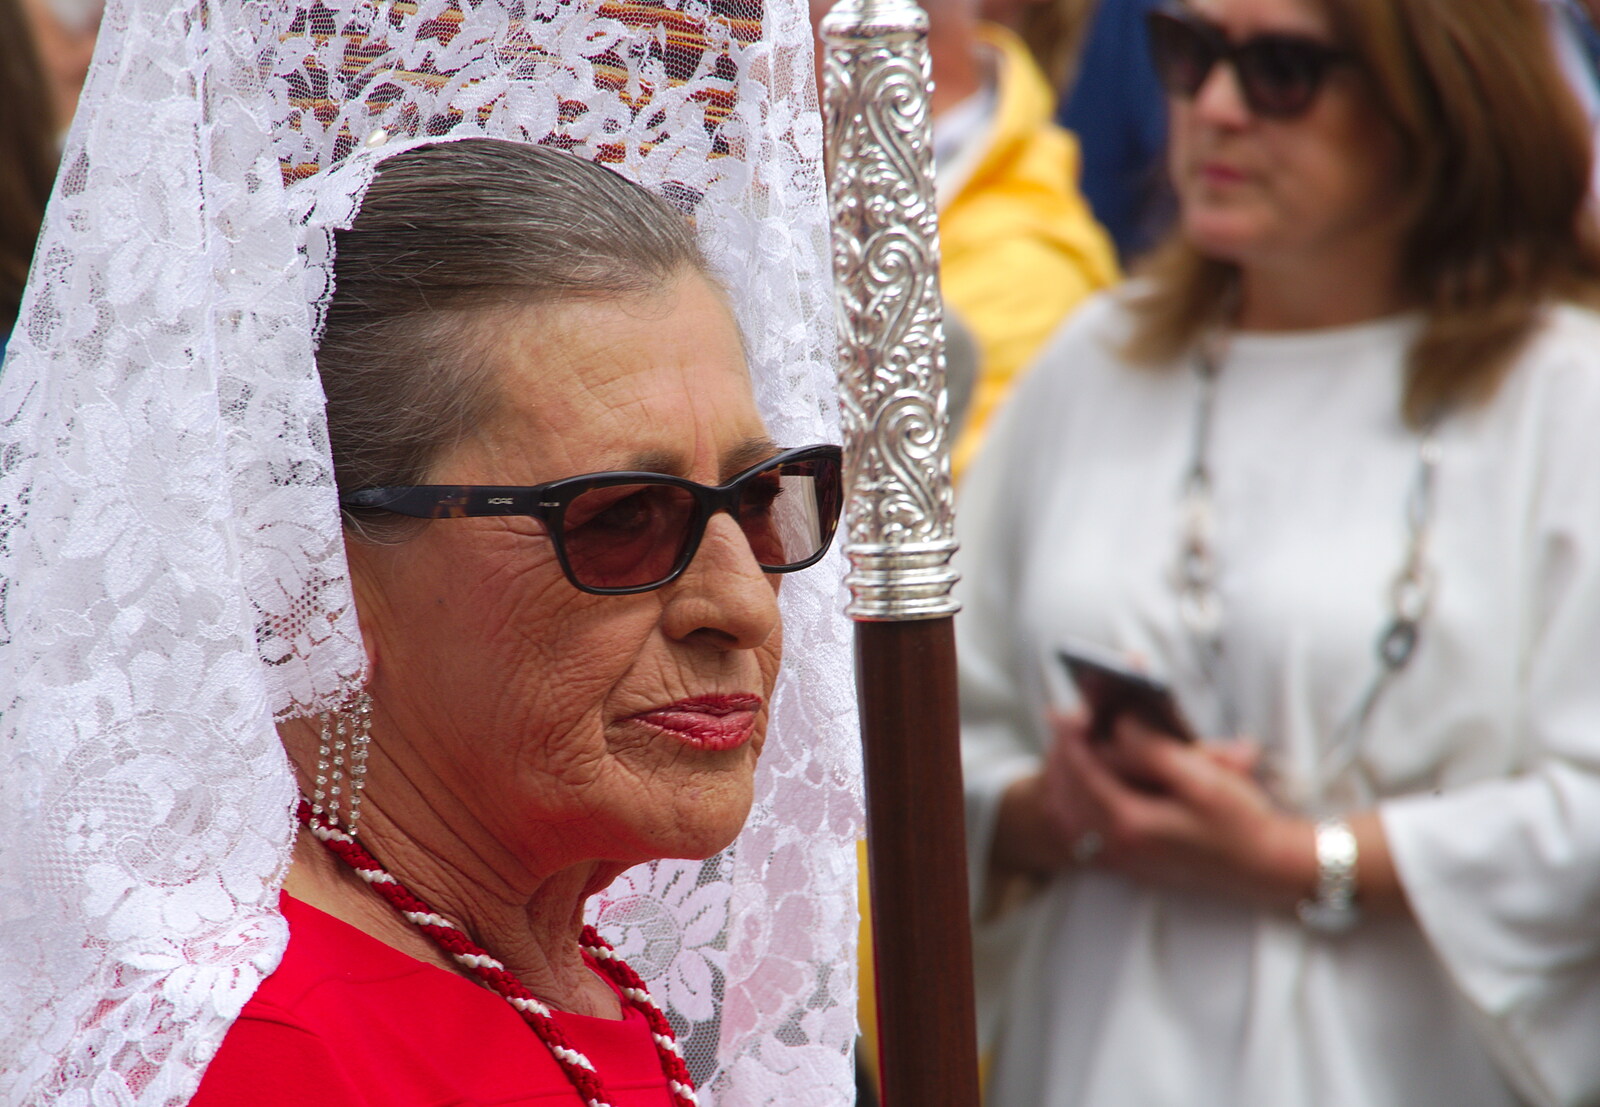 An old woman in a veil from An Easter Parade, Nerja, Andalusia, Spain - 21st April 2019